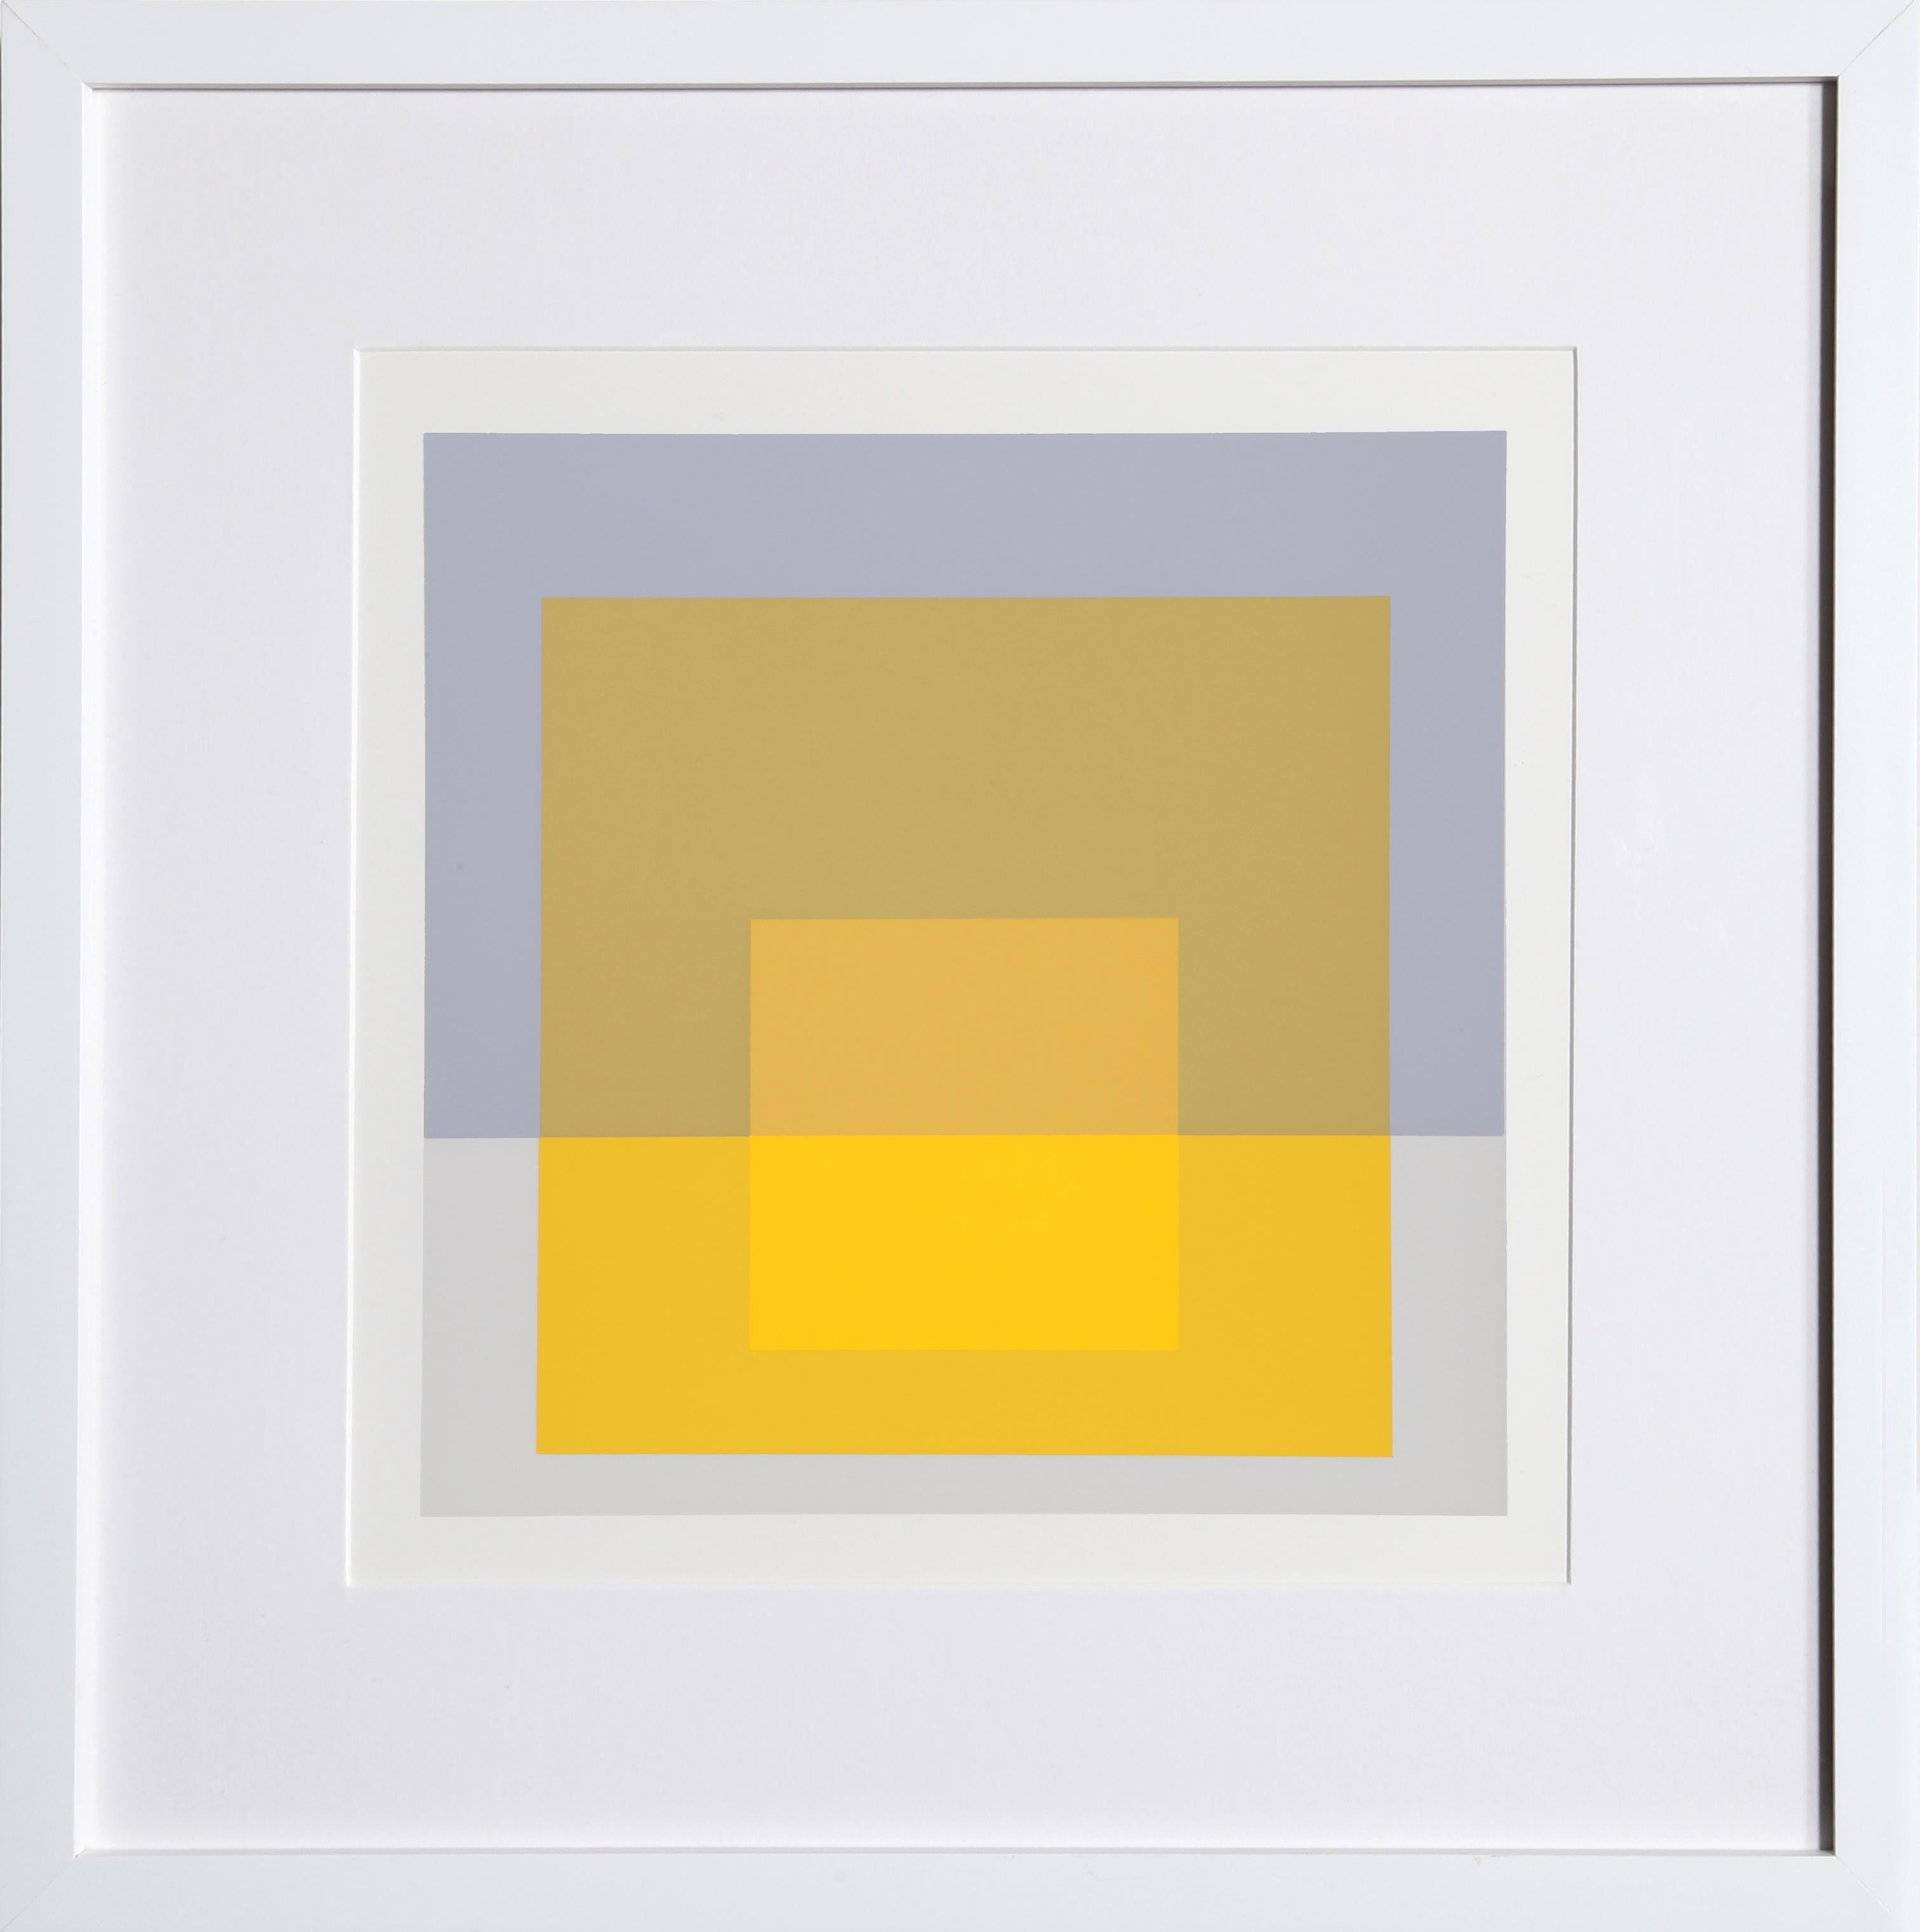 Homage to the Square, Framed Silkscreen by Josef Albers 1972